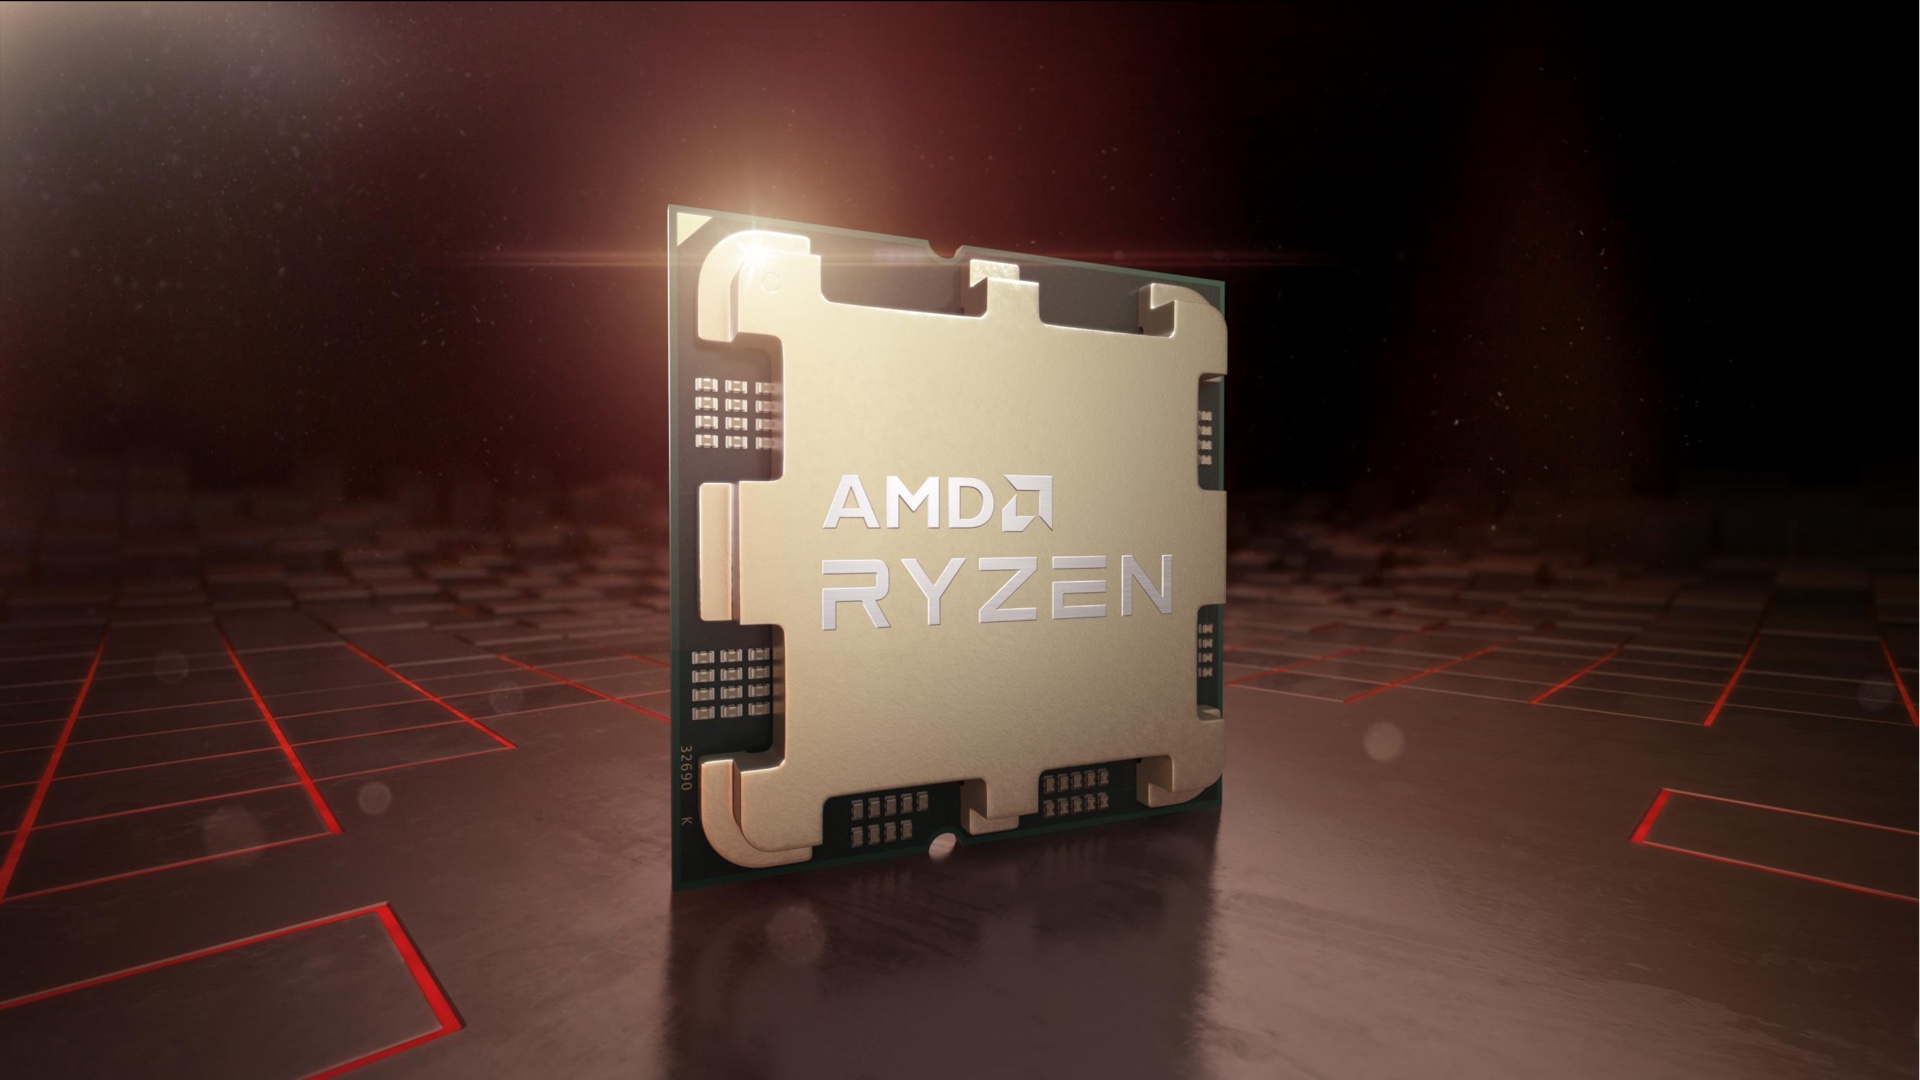 AMD's Ryzen 7000 CPUs will be faster than 5 GHz, require DDR5 RAM, support PCIe | Ars Technica